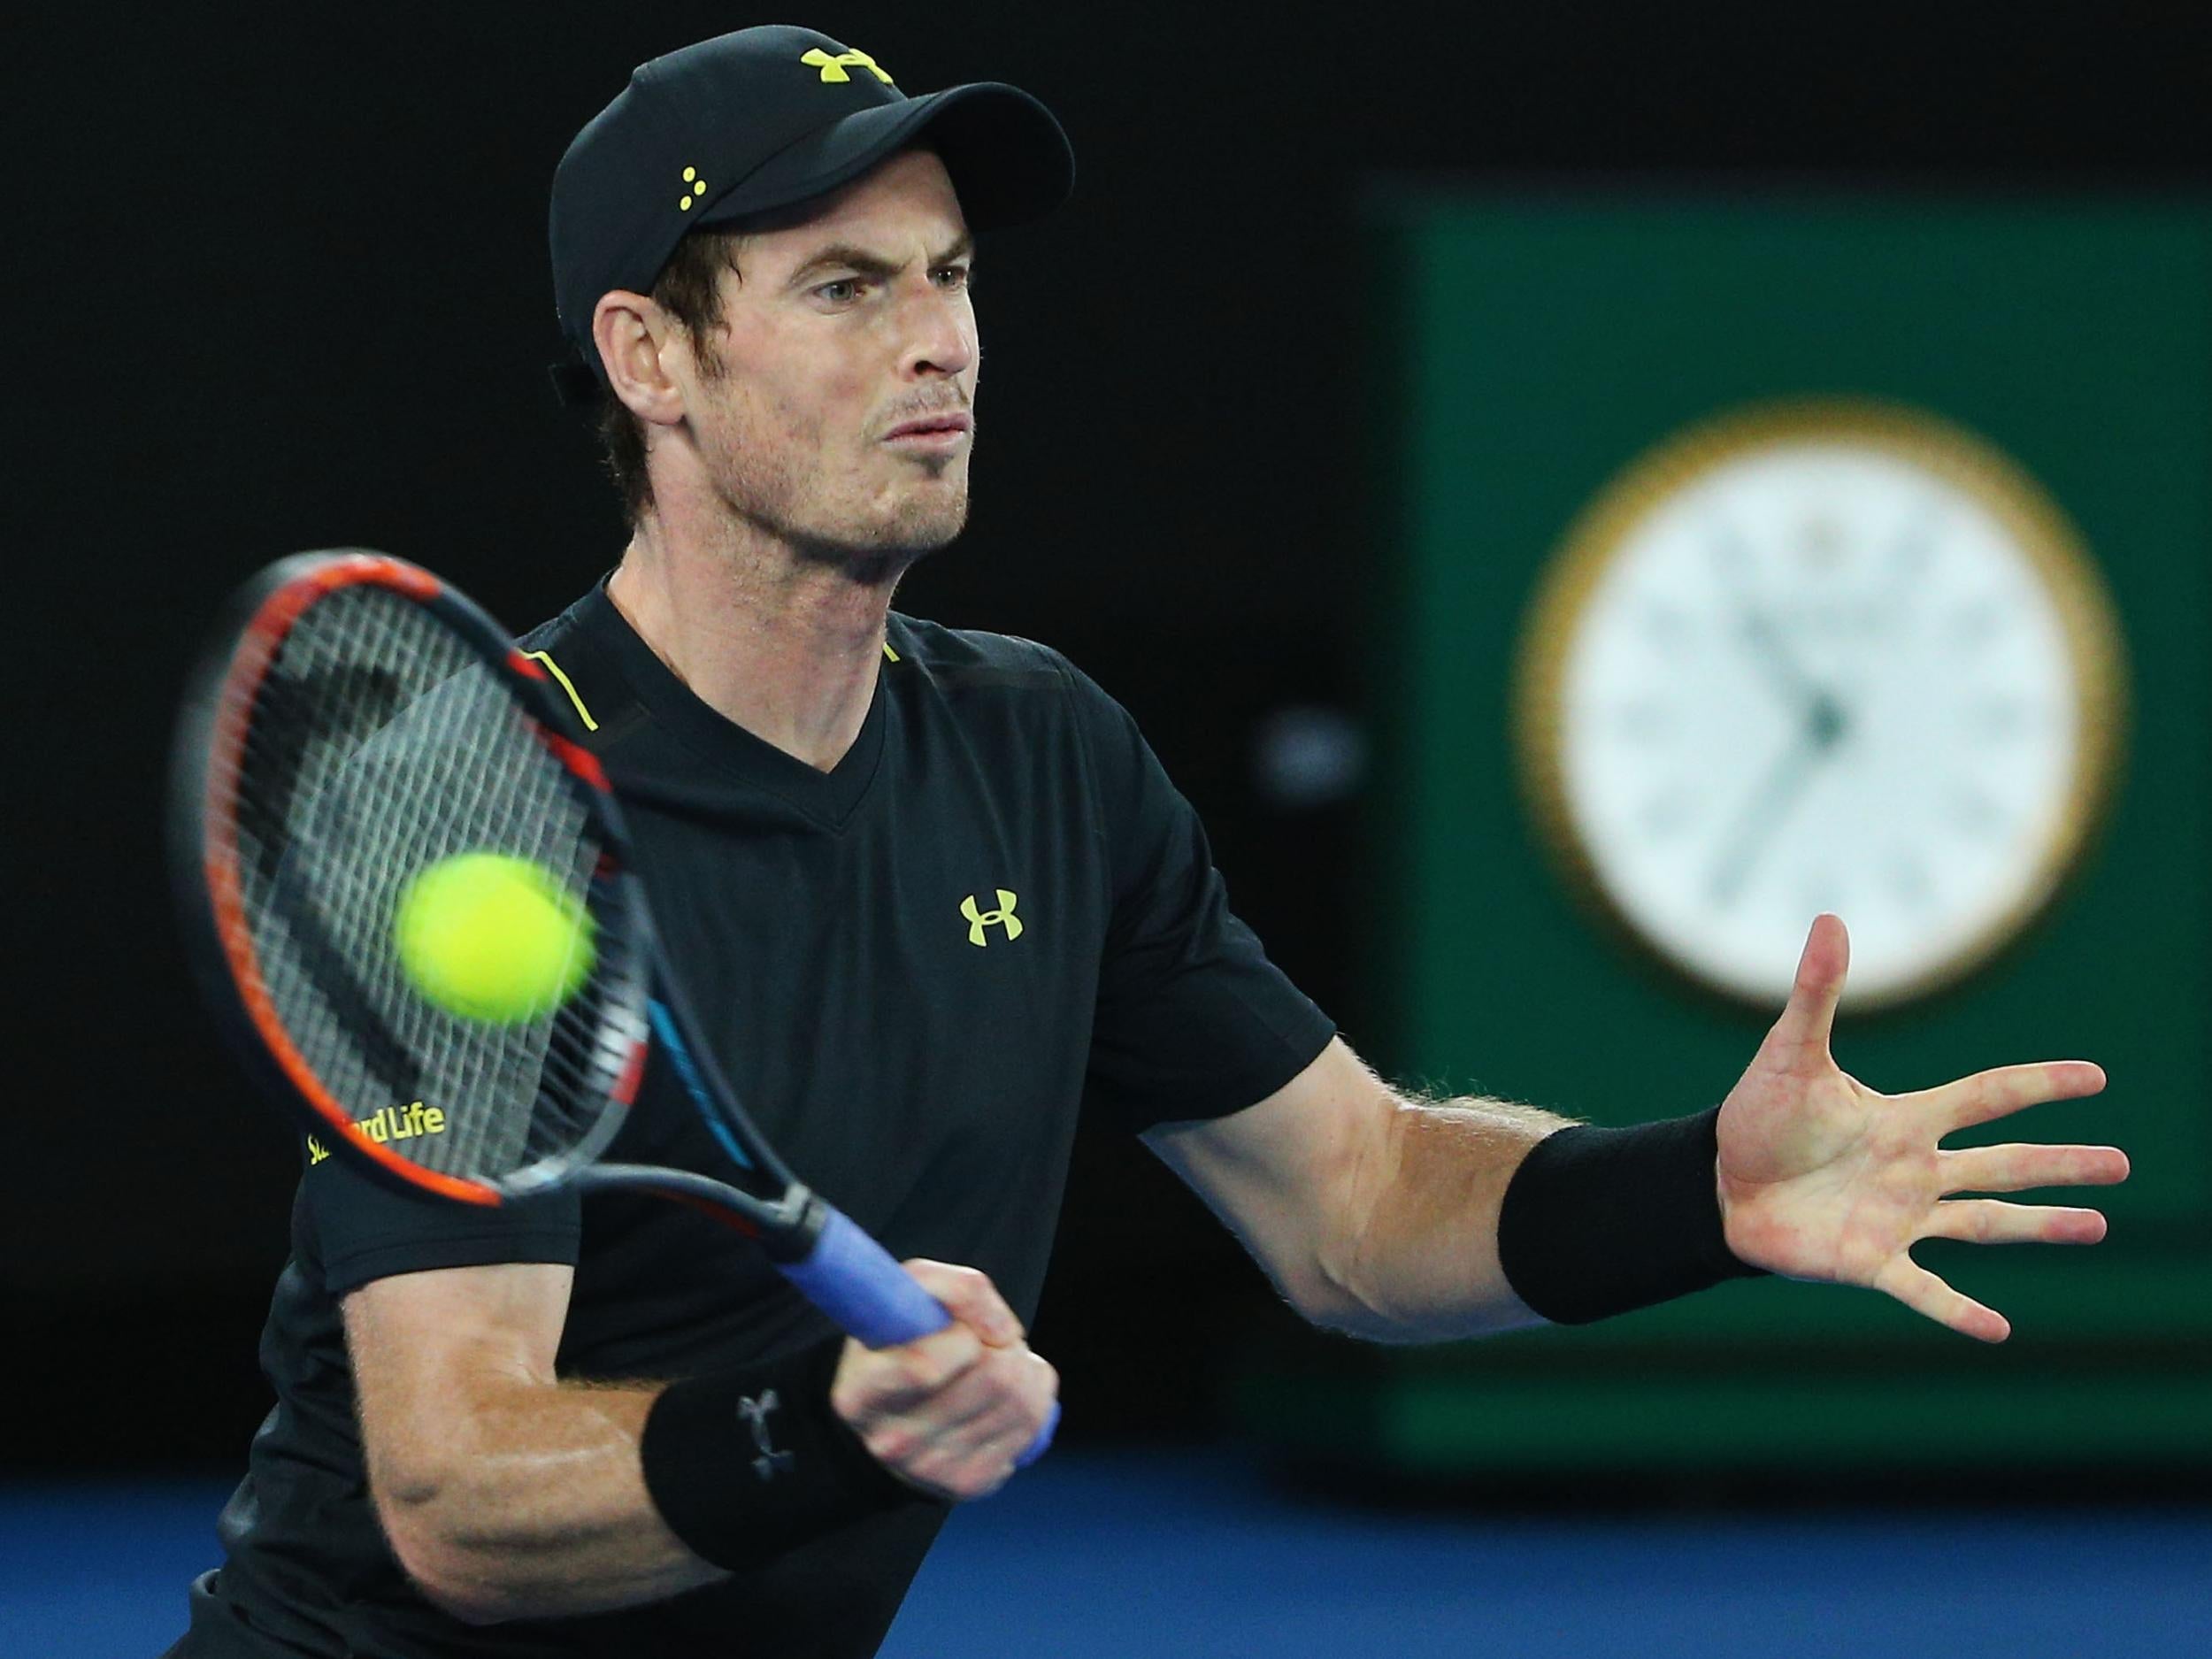 Murray is confident he will be fit for his third-round match on Friday